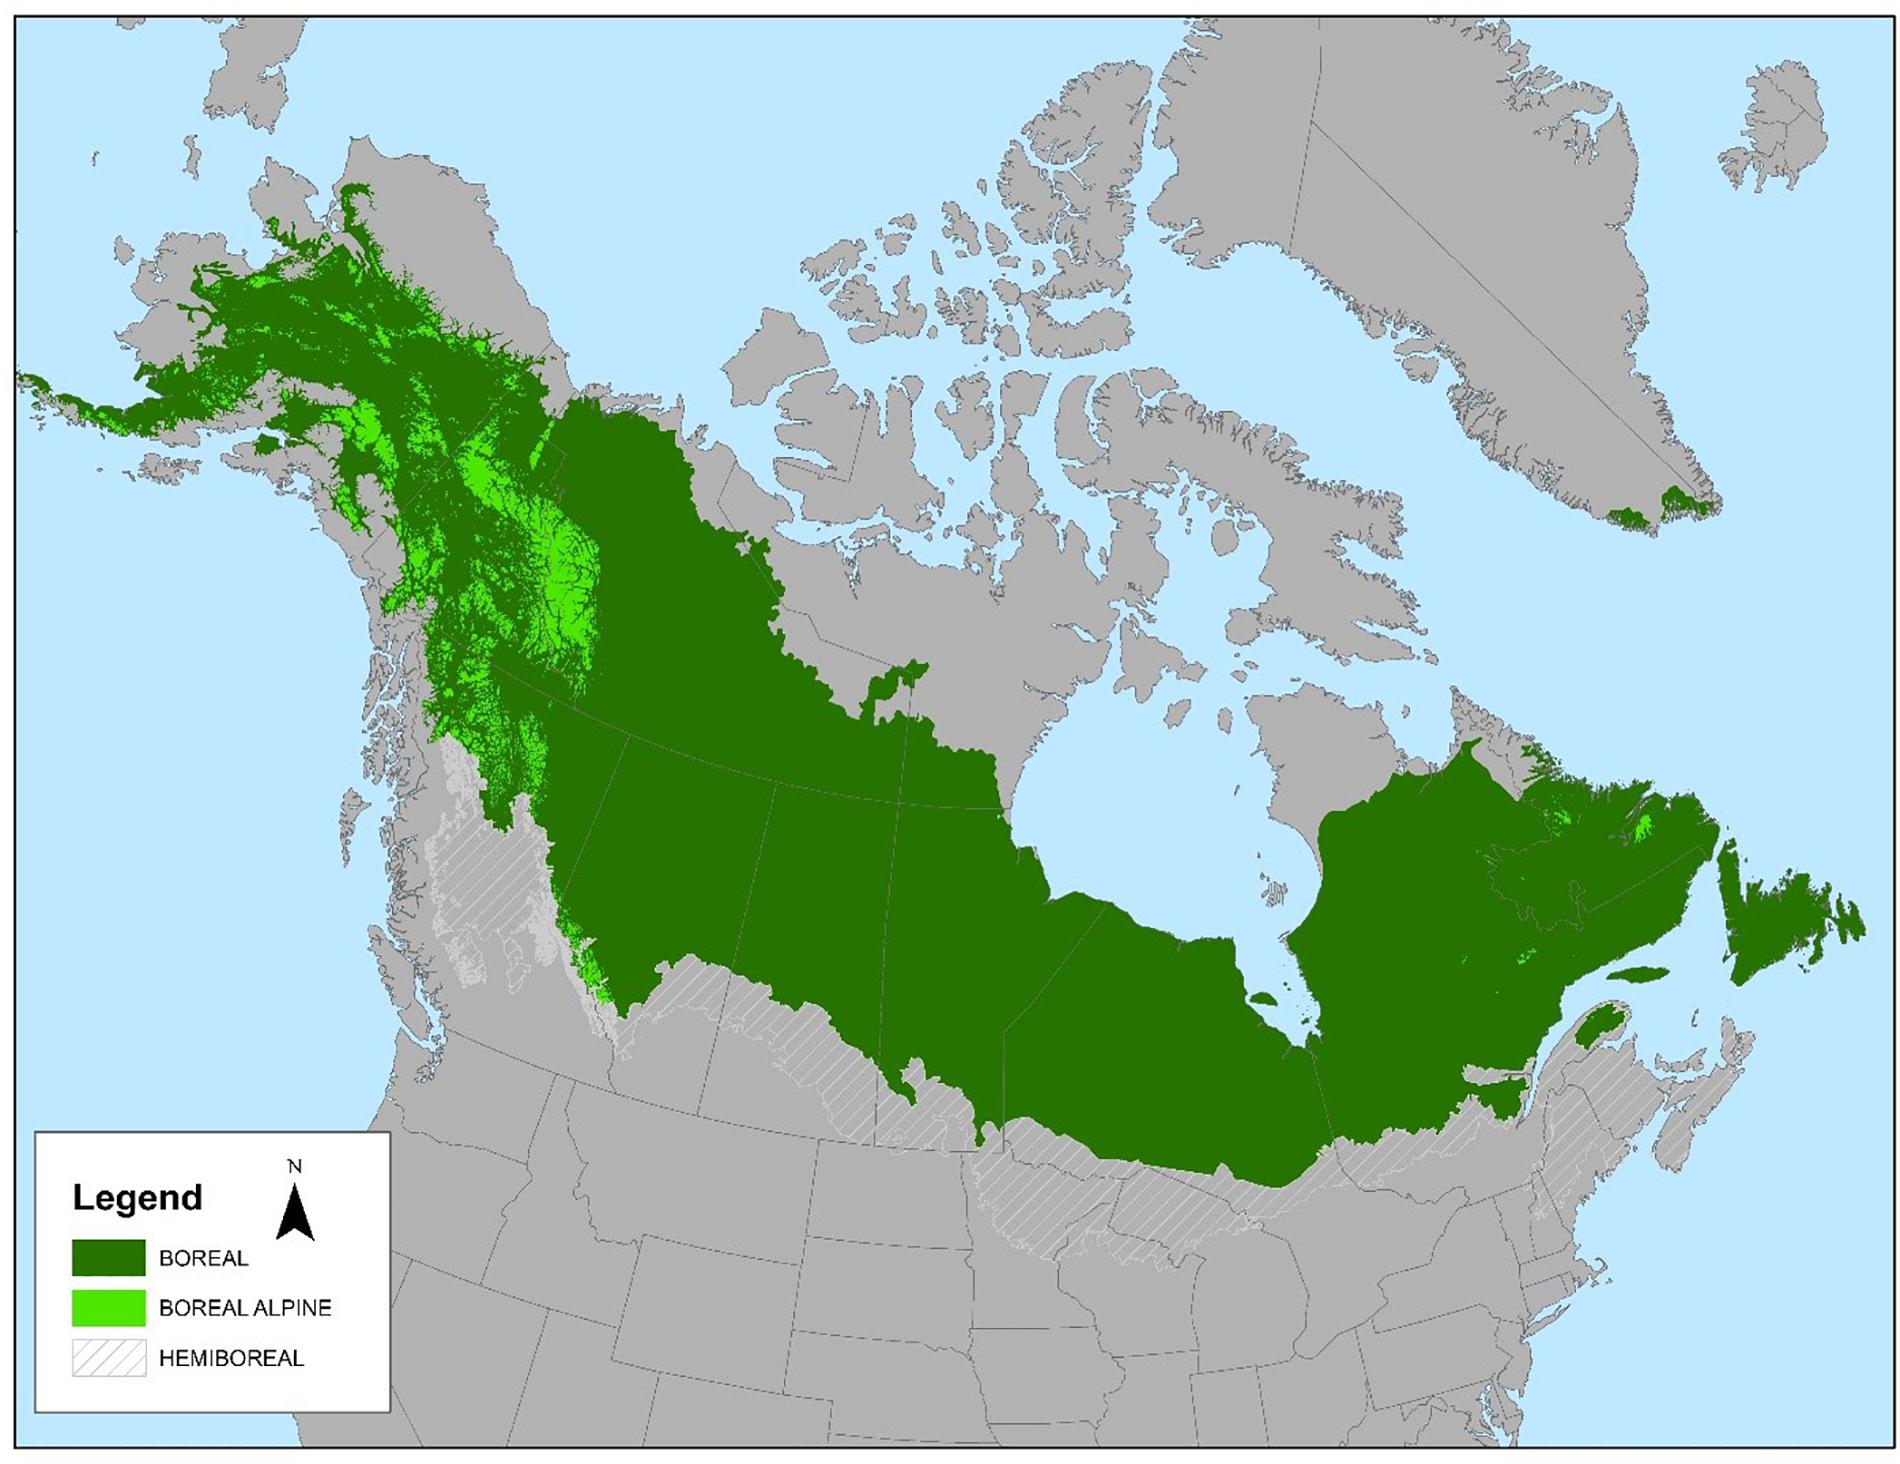 Taiga biome, boreal snow forest. Terrestrial ecosystem world map